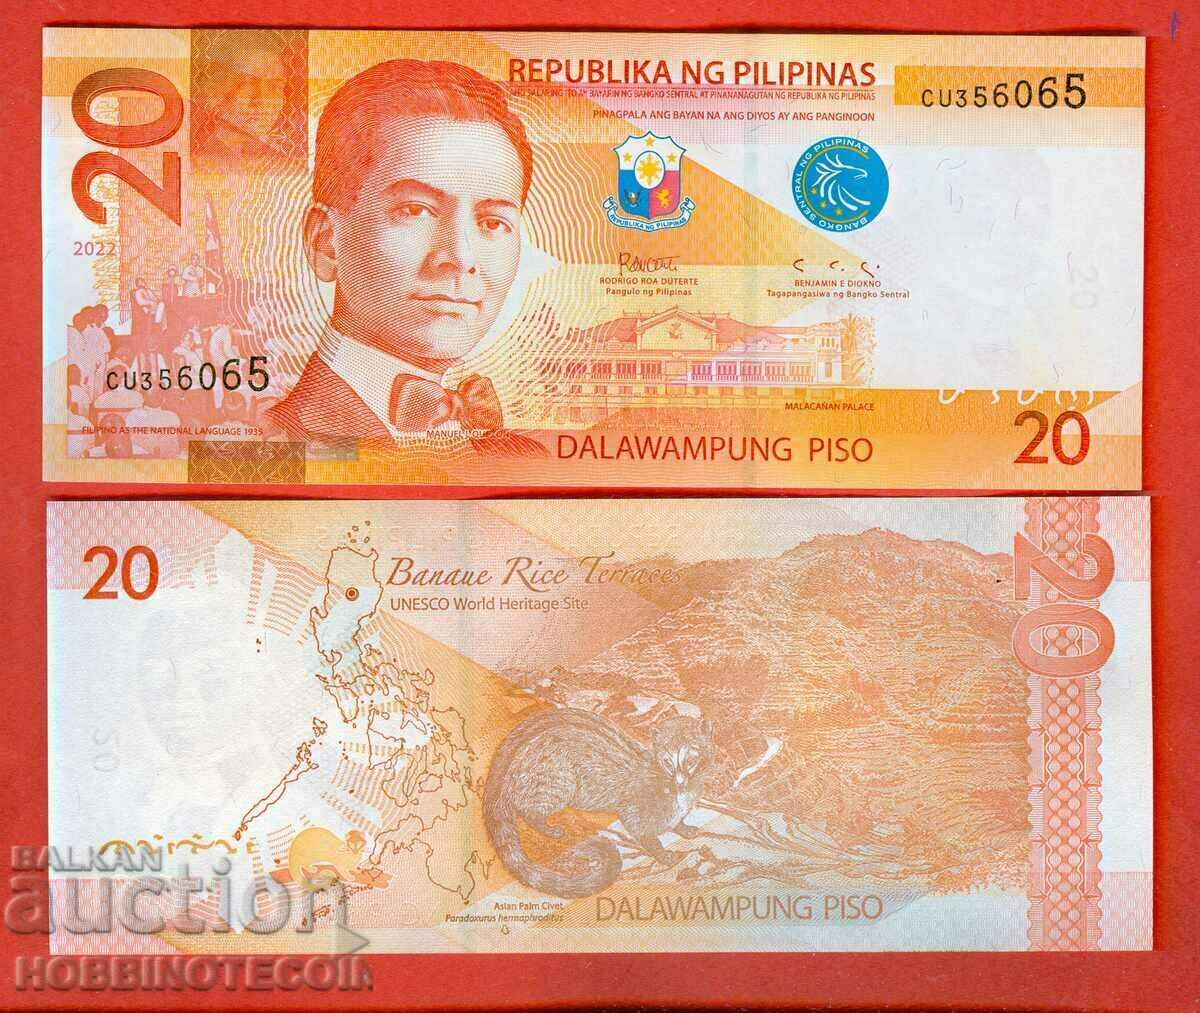 PHILIPPINES 20 Peso TWO LETTERS issue 2022 NEW UNC